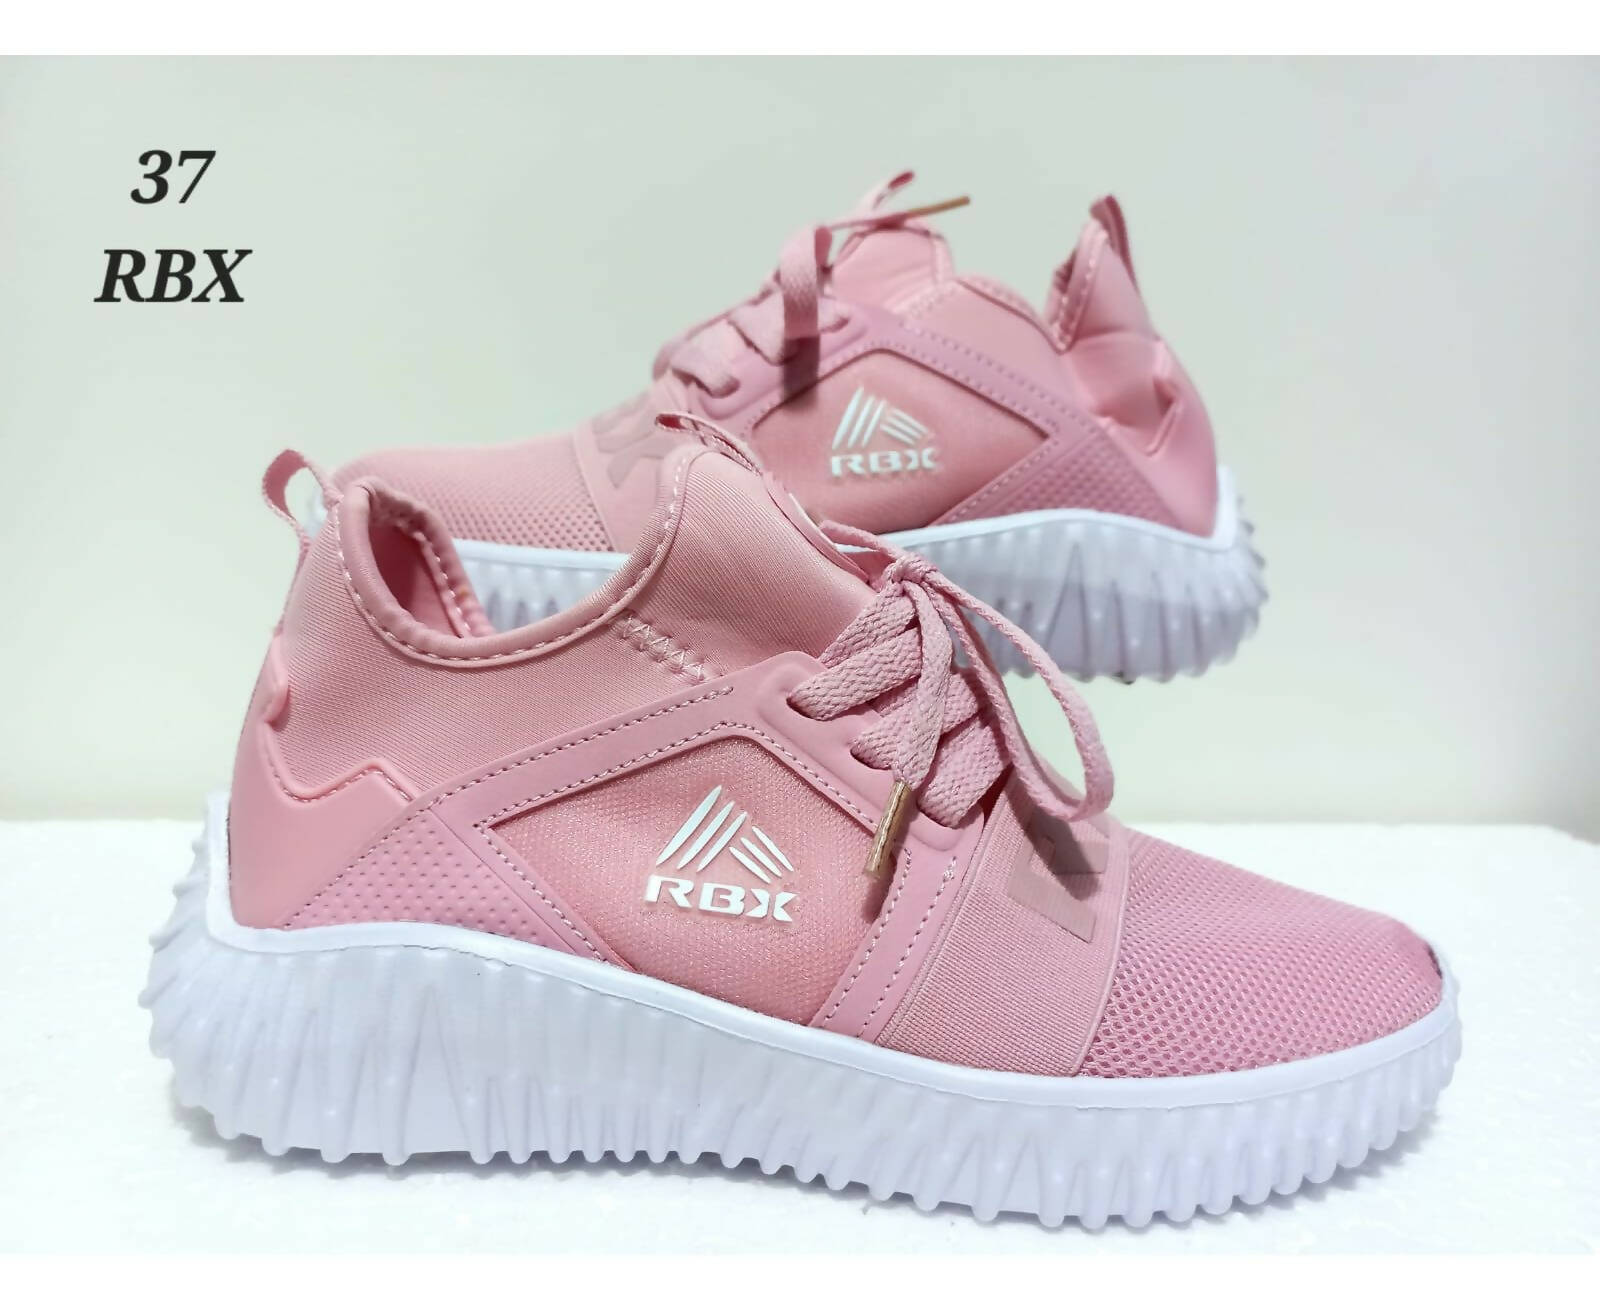 FOOTLOCKER SHOES FOR KIDS RBX ( NEW ARRIVAL )